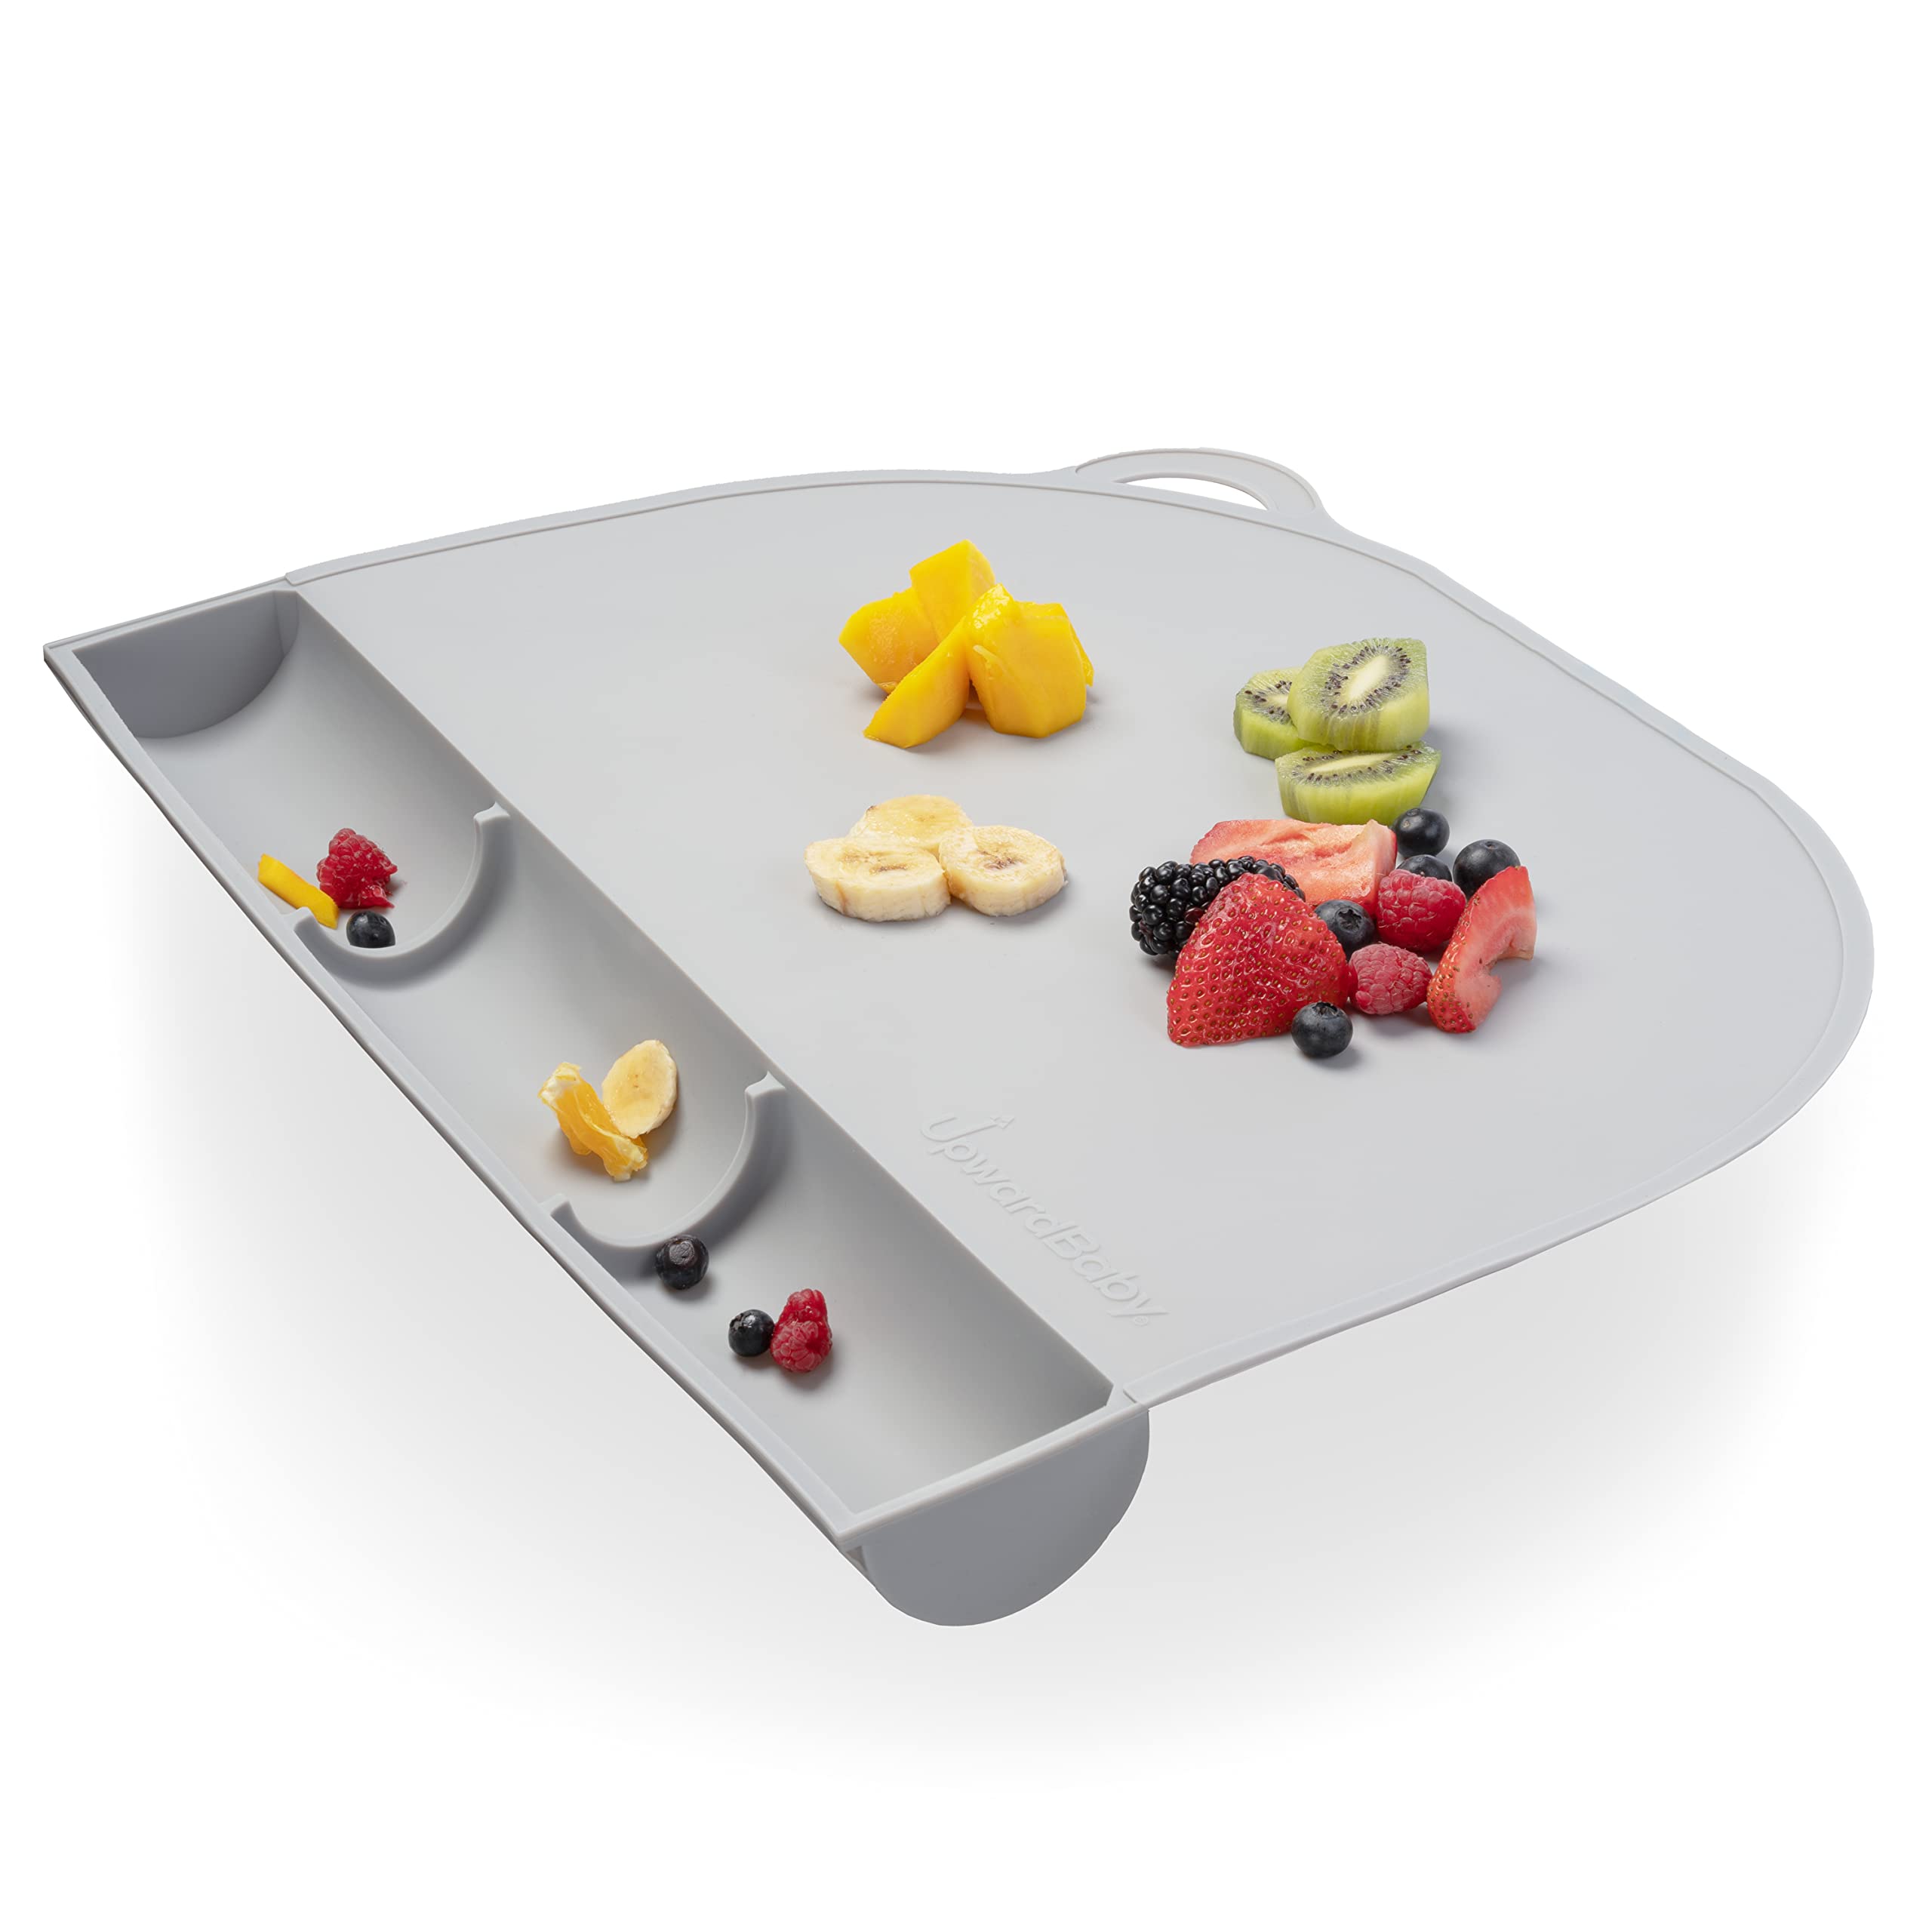 Food Catching Baby Placemat with Suction - Upwardbaby Gray Silicone Placemats for Kids Babies and Toddlers - Clean Mealtimes at Home or for